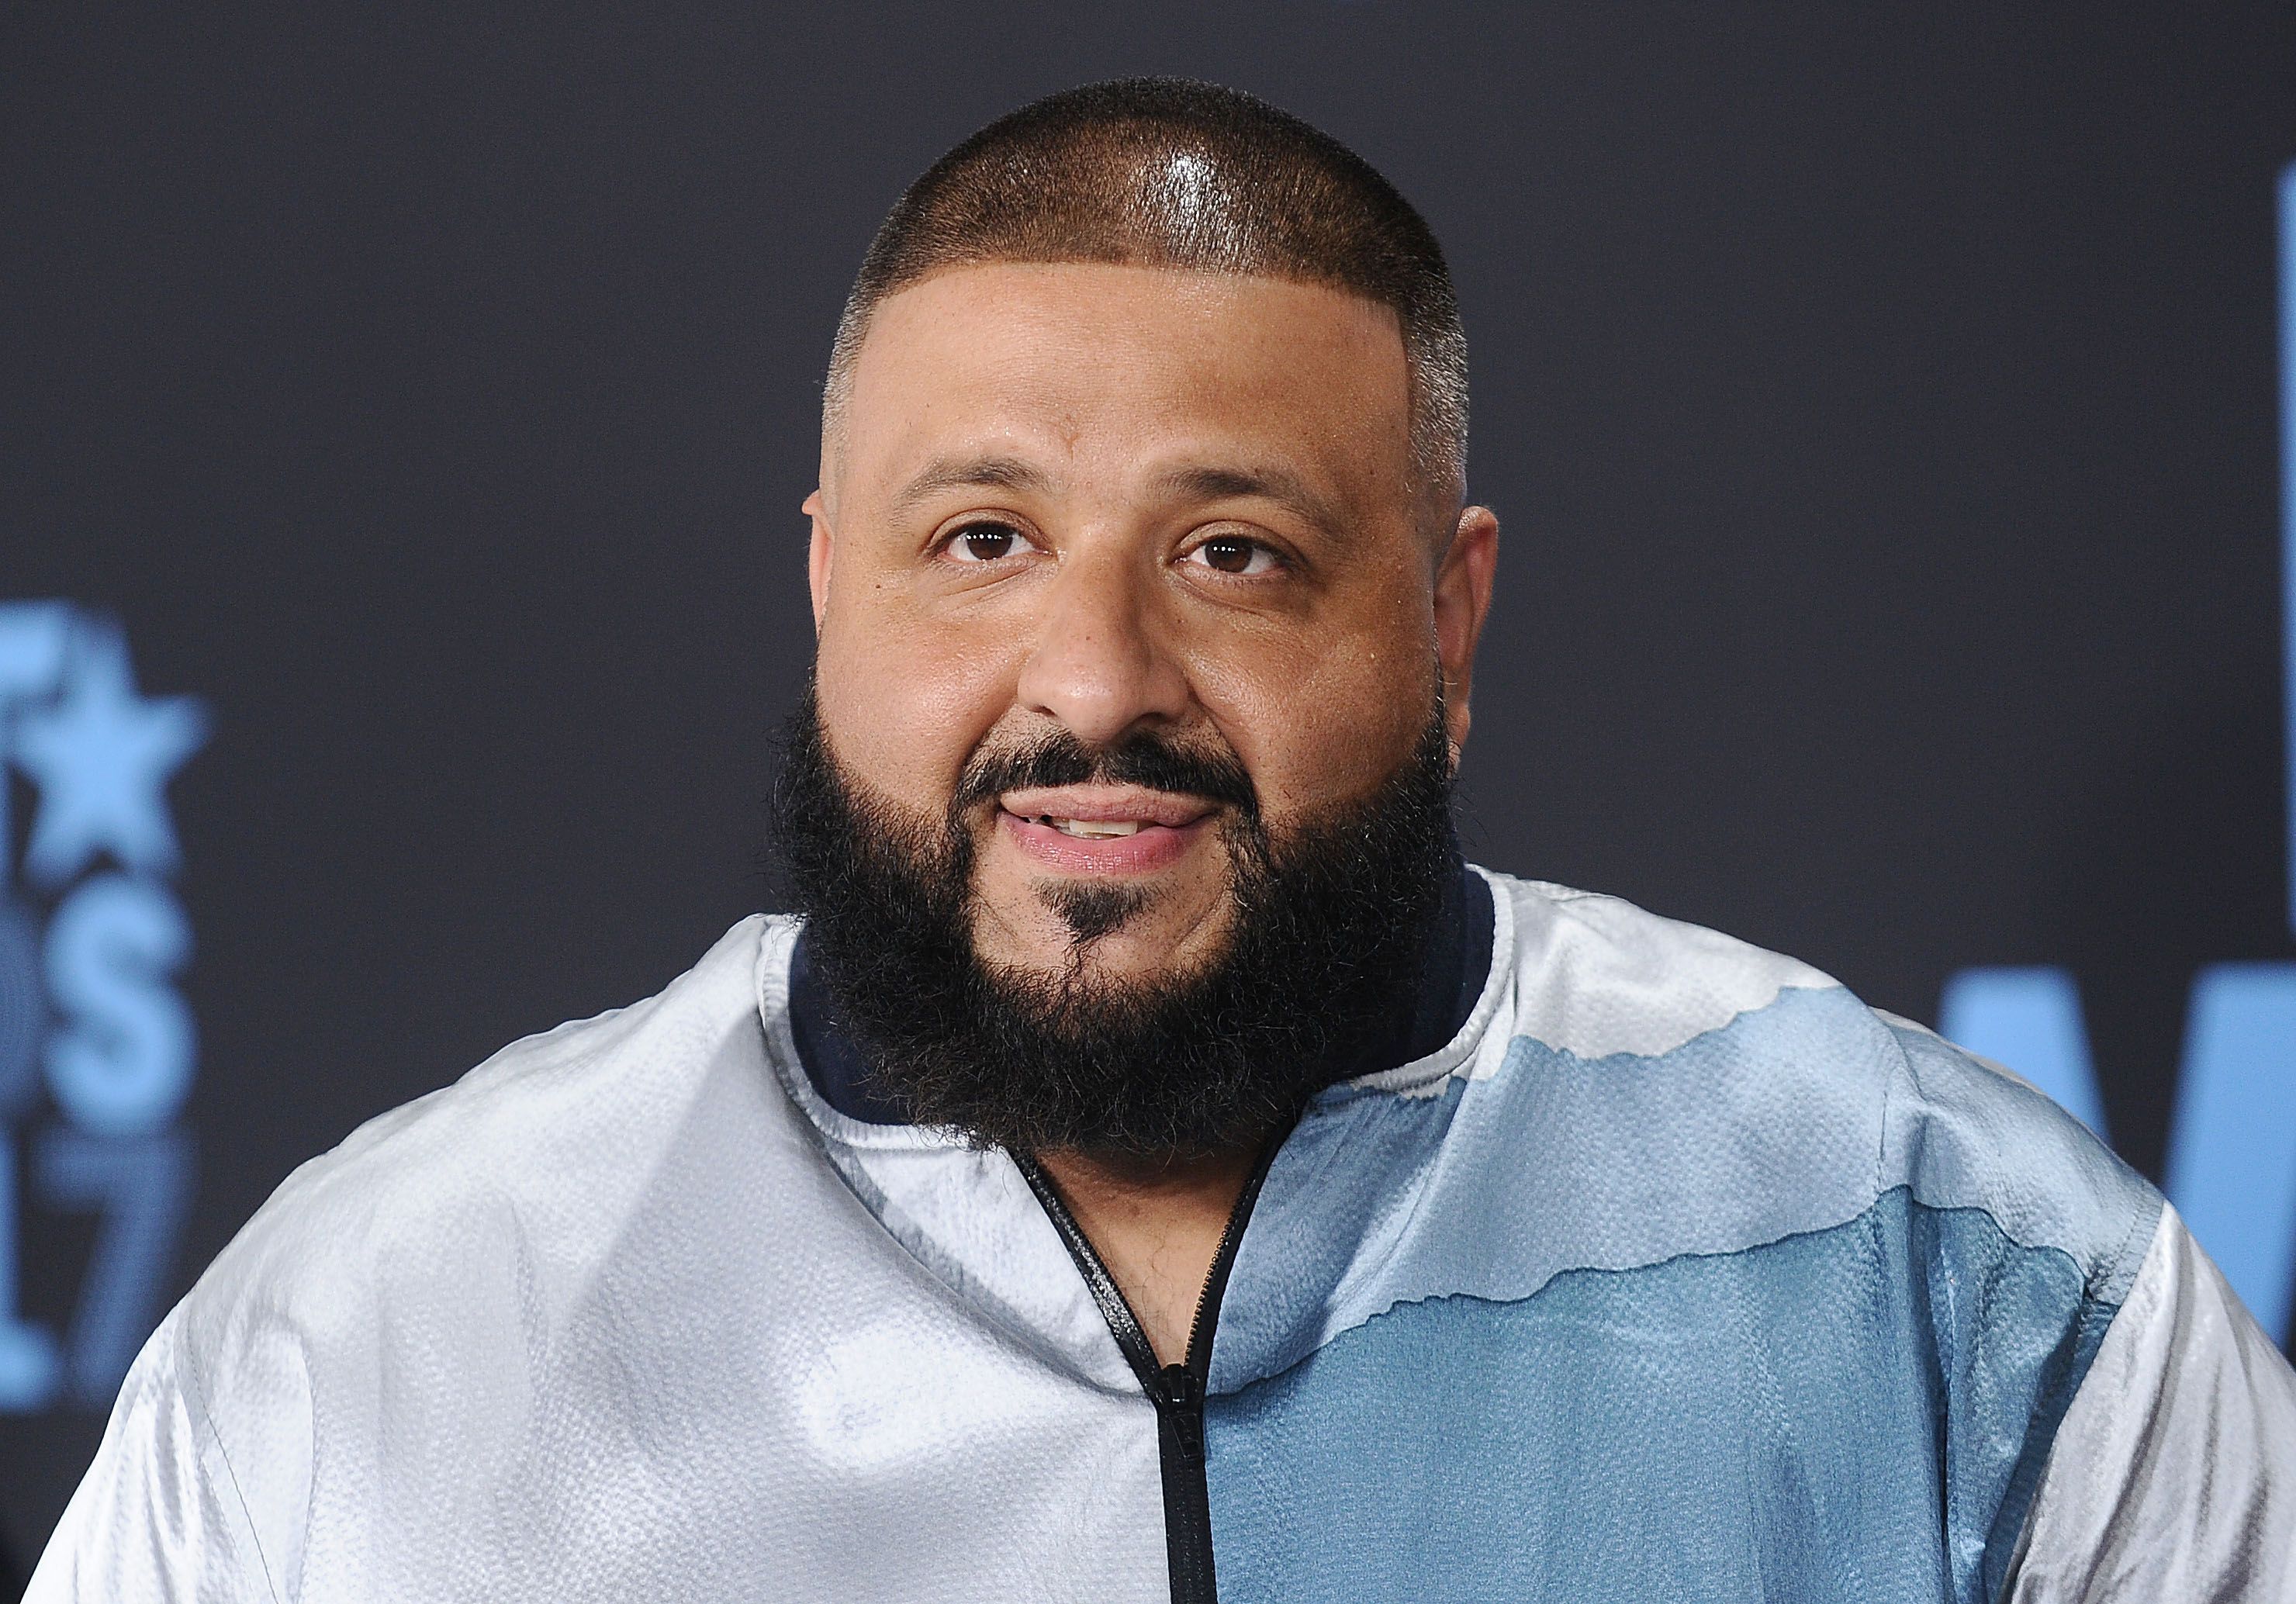 DJ Khaled attends the 2017 BET Awards at Microsoft Theater on June 25, 2017. | Photo: Getty Images